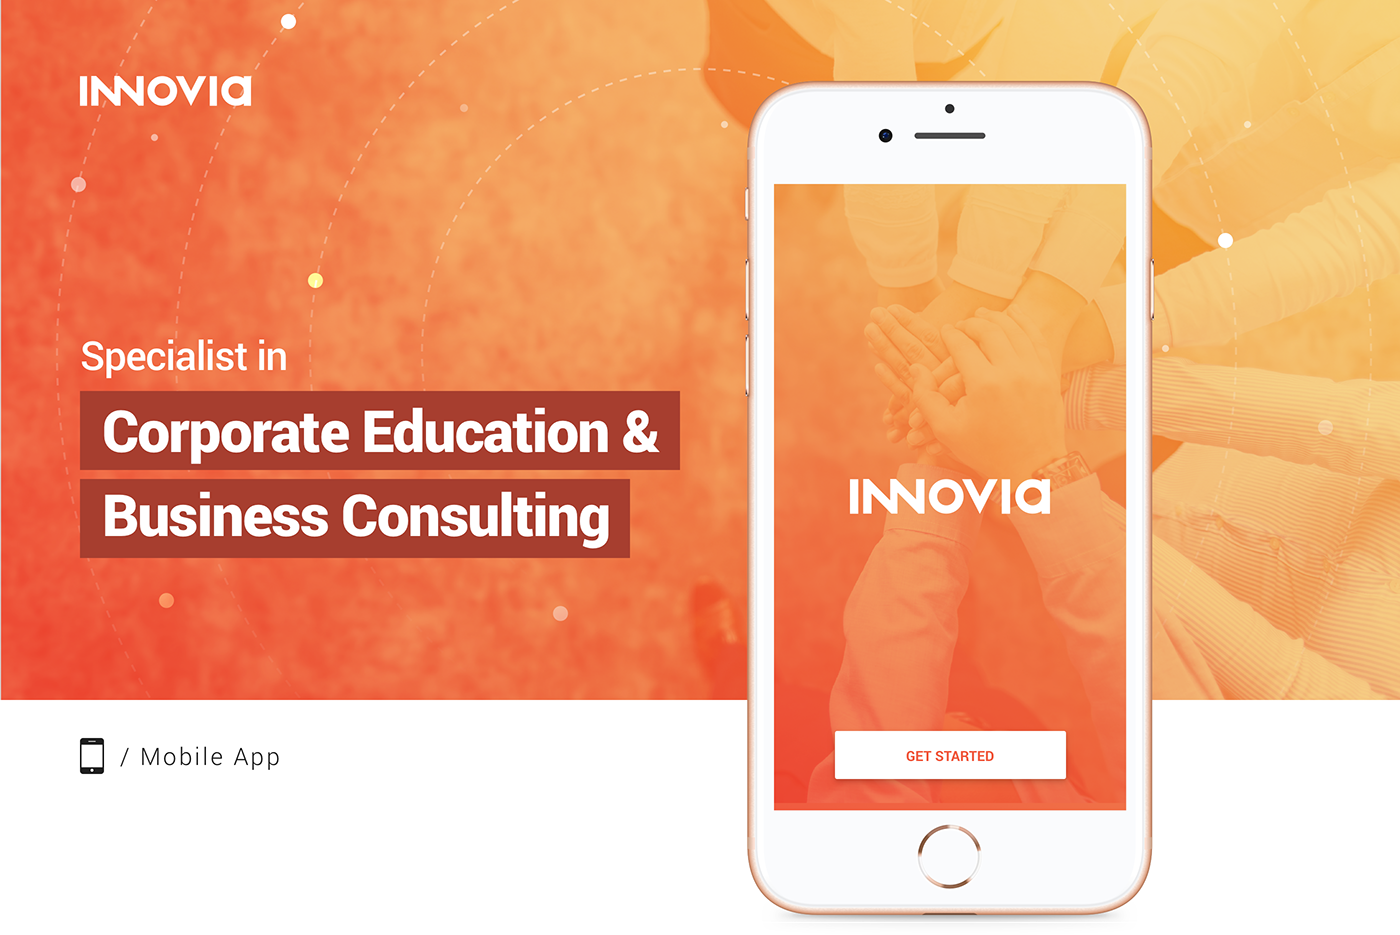 mobile app Interface ux online training courses Innovia visual design interaction